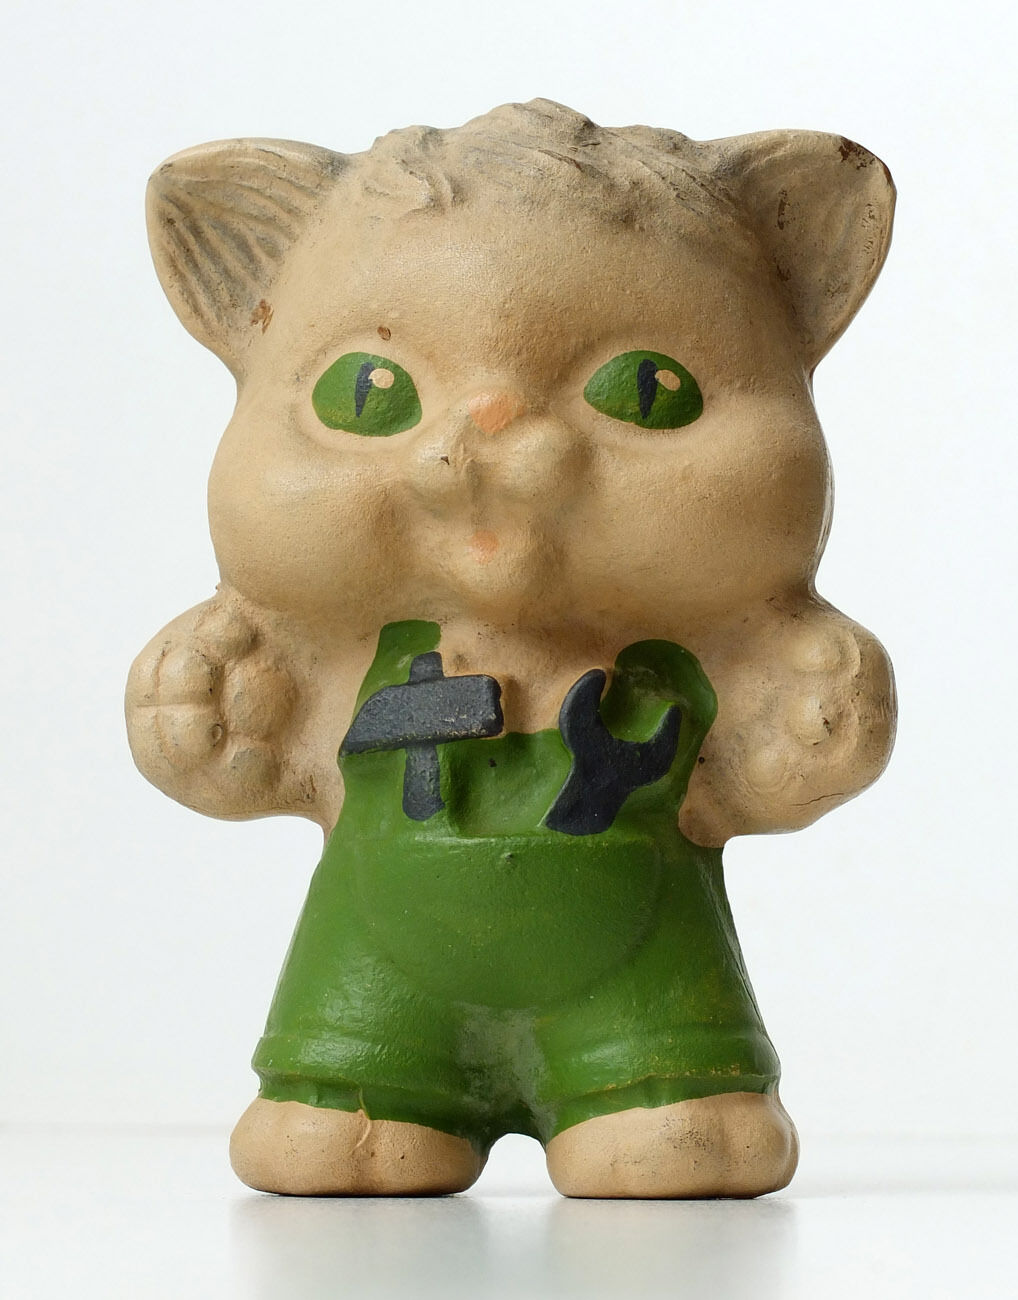 1950s Soviet Russia Russian Vintage Rubber Toy Kitty Cat Constructor